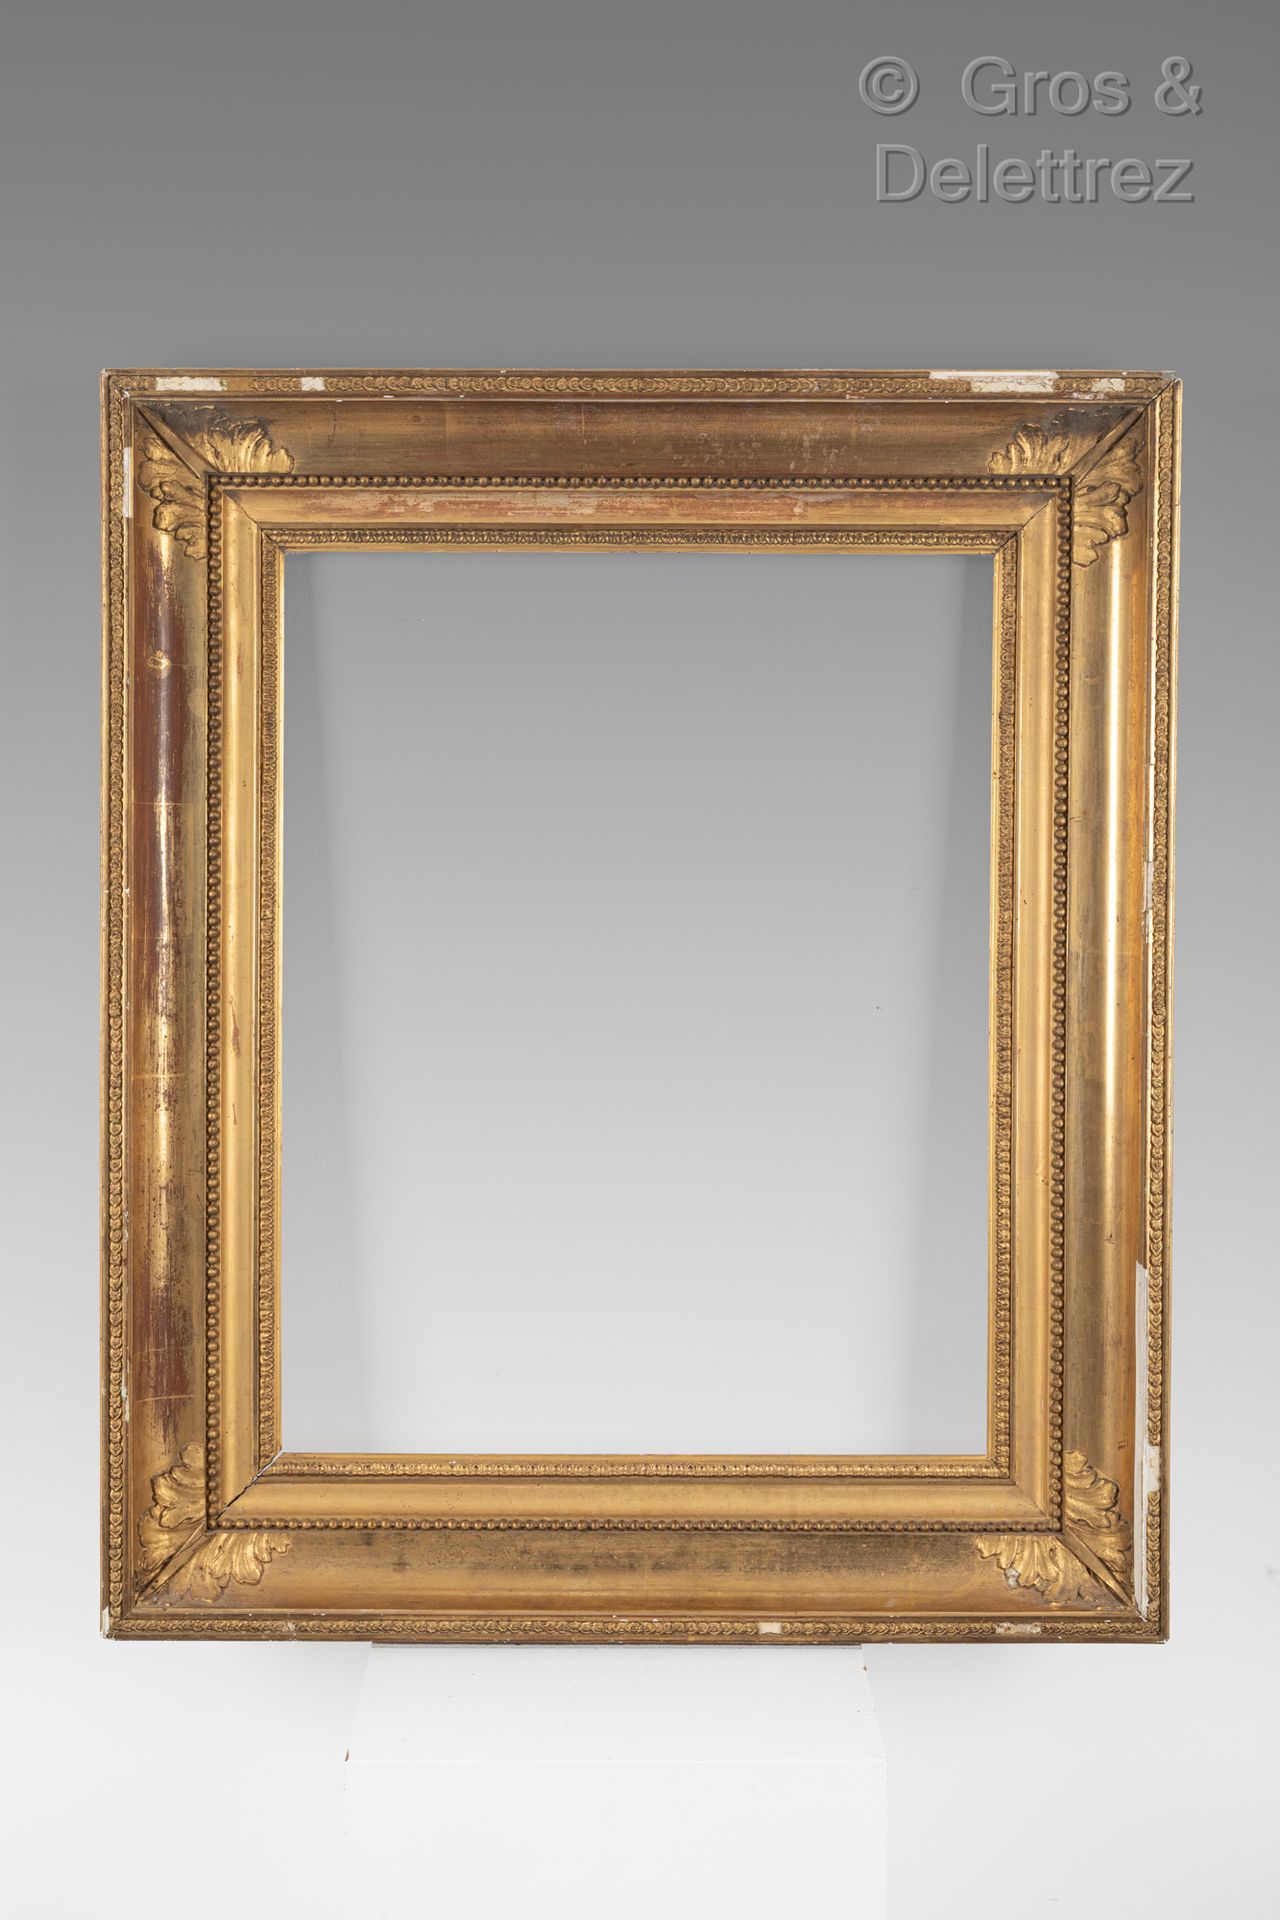 Null Wood and gilded stucco frame decorated with a frieze of piastres, pearls an&hellip;